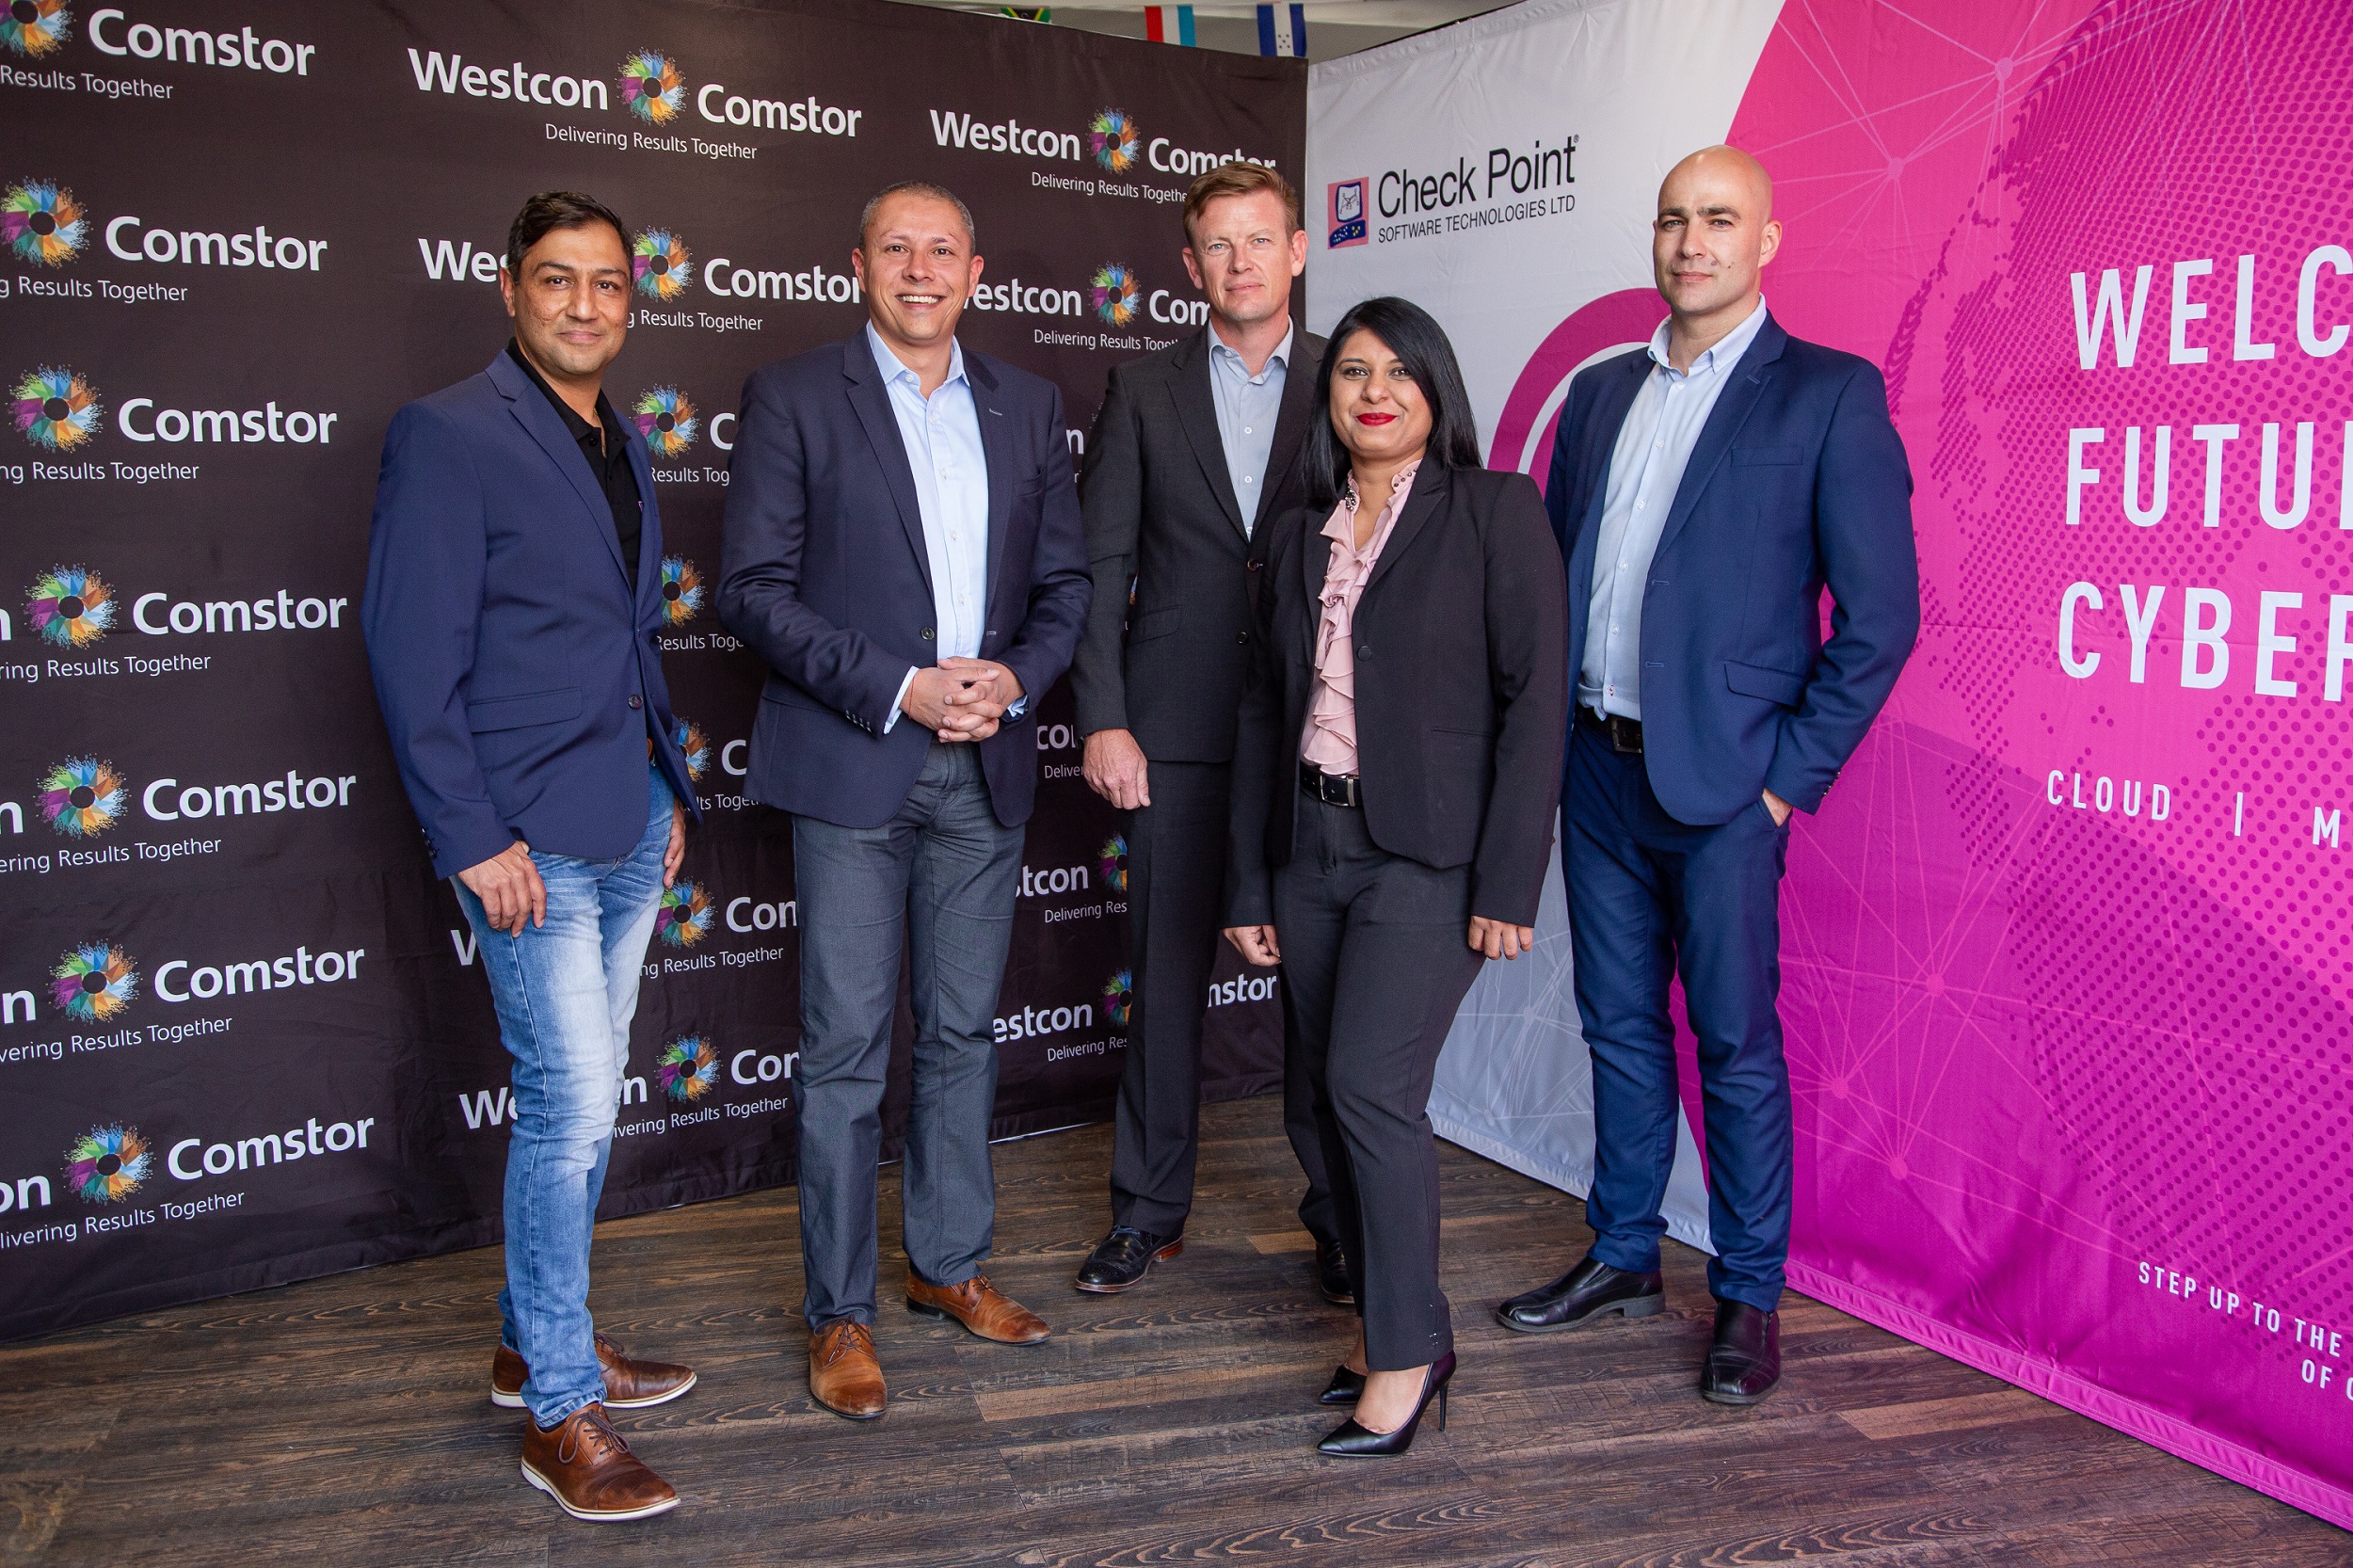 Westcon-Comstor Sub-Saharan Africa will now distribute Check Point Software